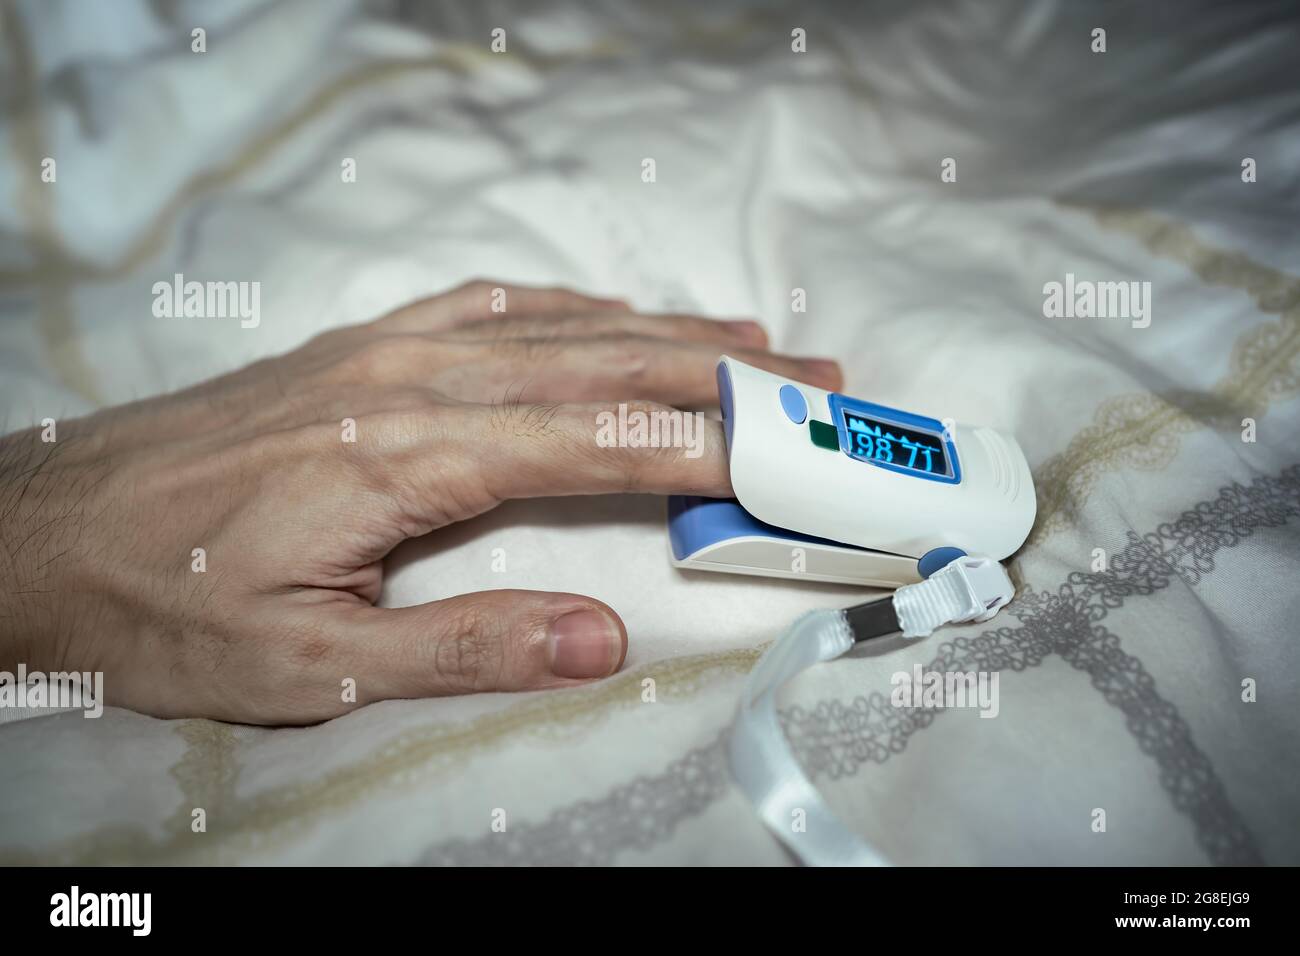 https://c8.alamy.com/comp/2G8EJG9/a-pulse-oximeter-may-help-to-detect-the-covid-19-symptom-if-the-oxygen-level-is-lower-than-92-it-is-the-sign-of-covid-19-infection-2G8EJG9.jpg